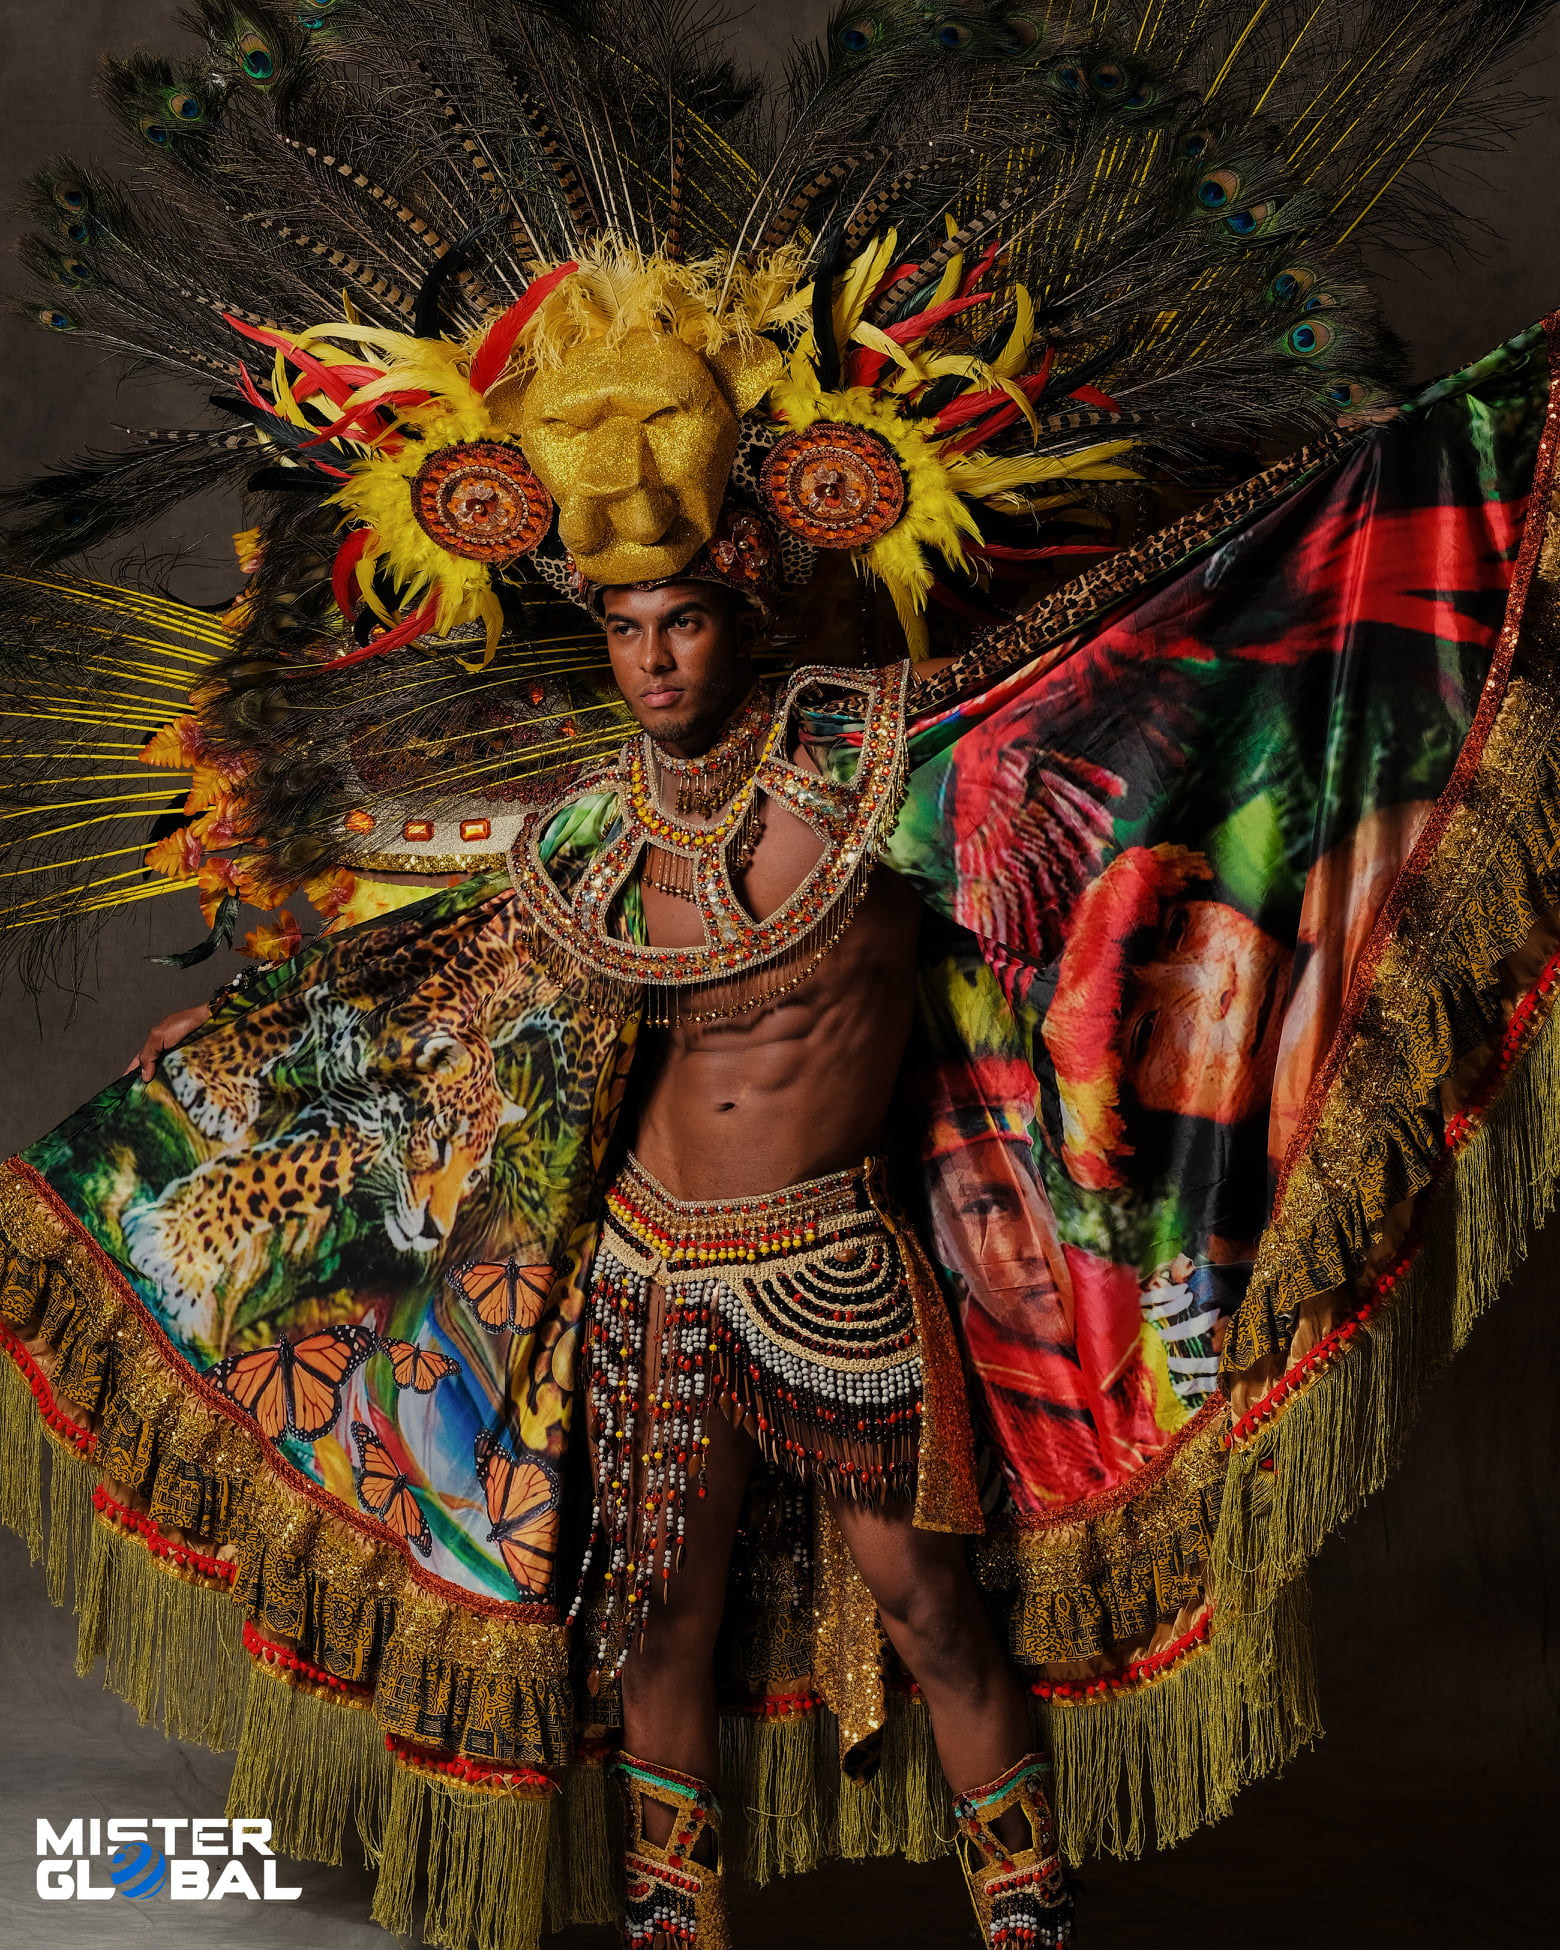 A bare-chested man wears a large, ornate headdress, colorful, flared cloak, and beaded loincloth